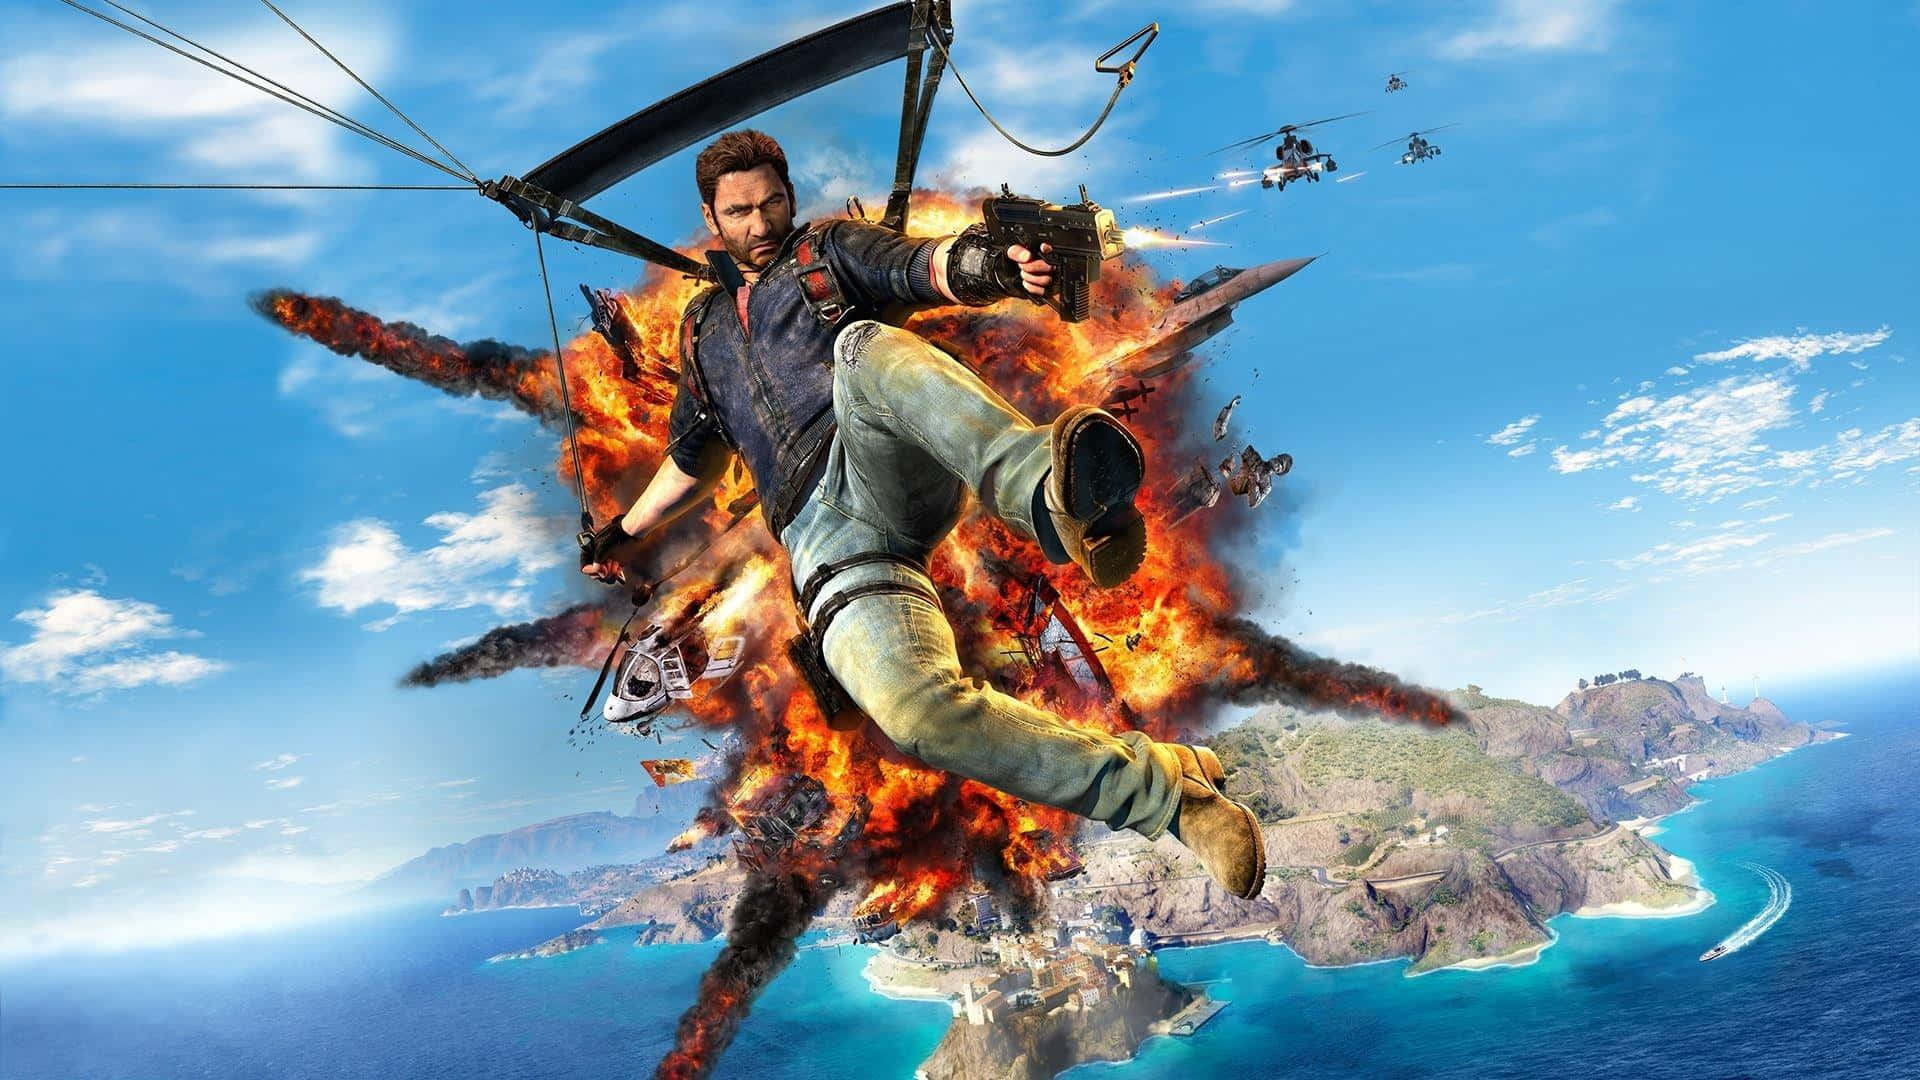 Just Cause 1 Plane Explosion In The Sky Wallpaper